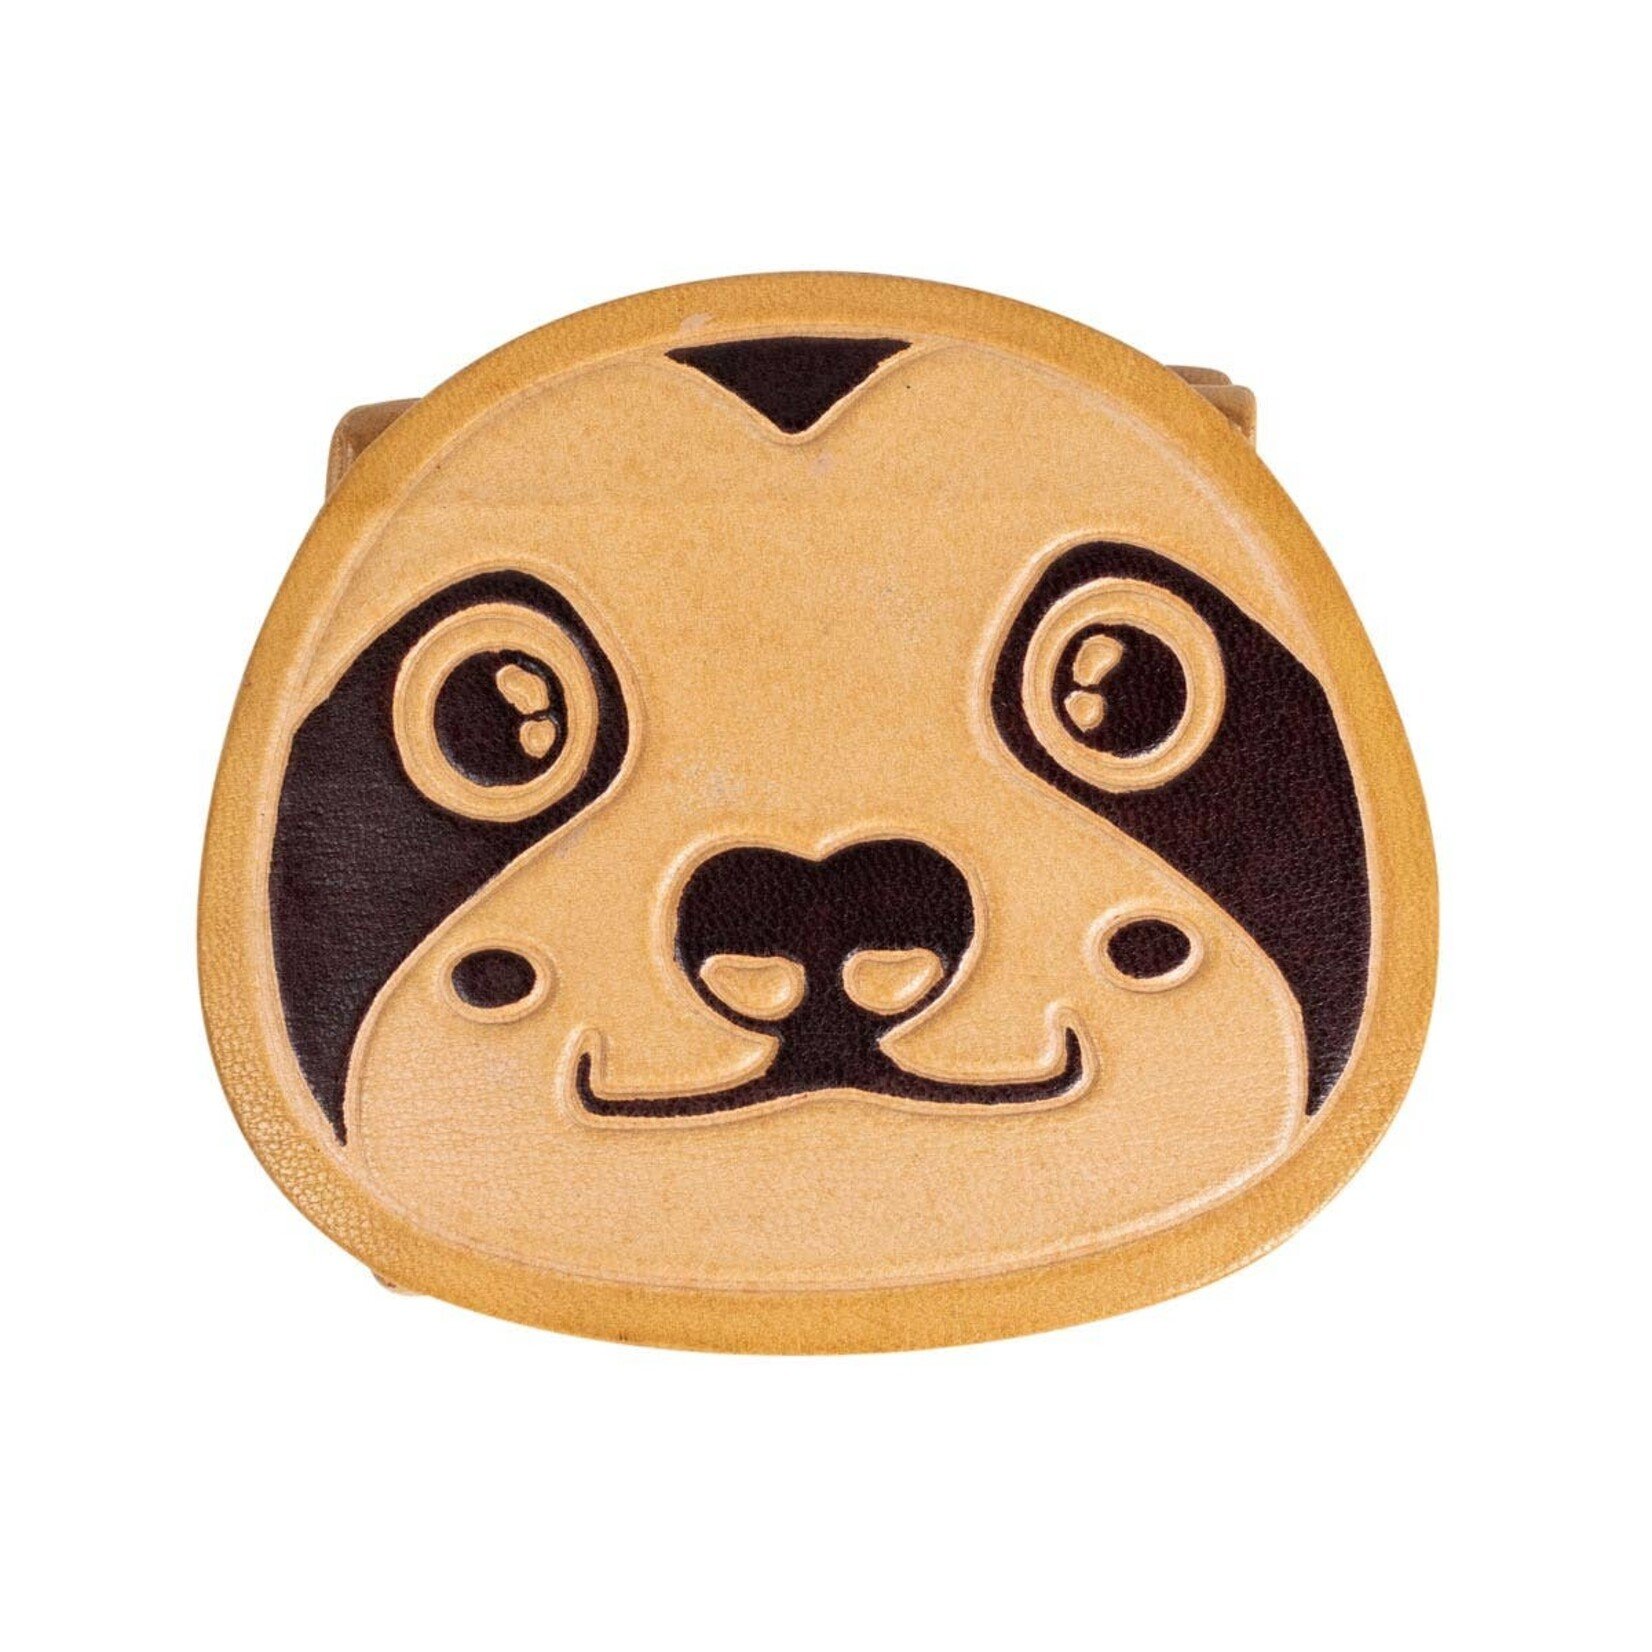 Ten Thousand Villages USA Sloth Leather Coin Purse, India